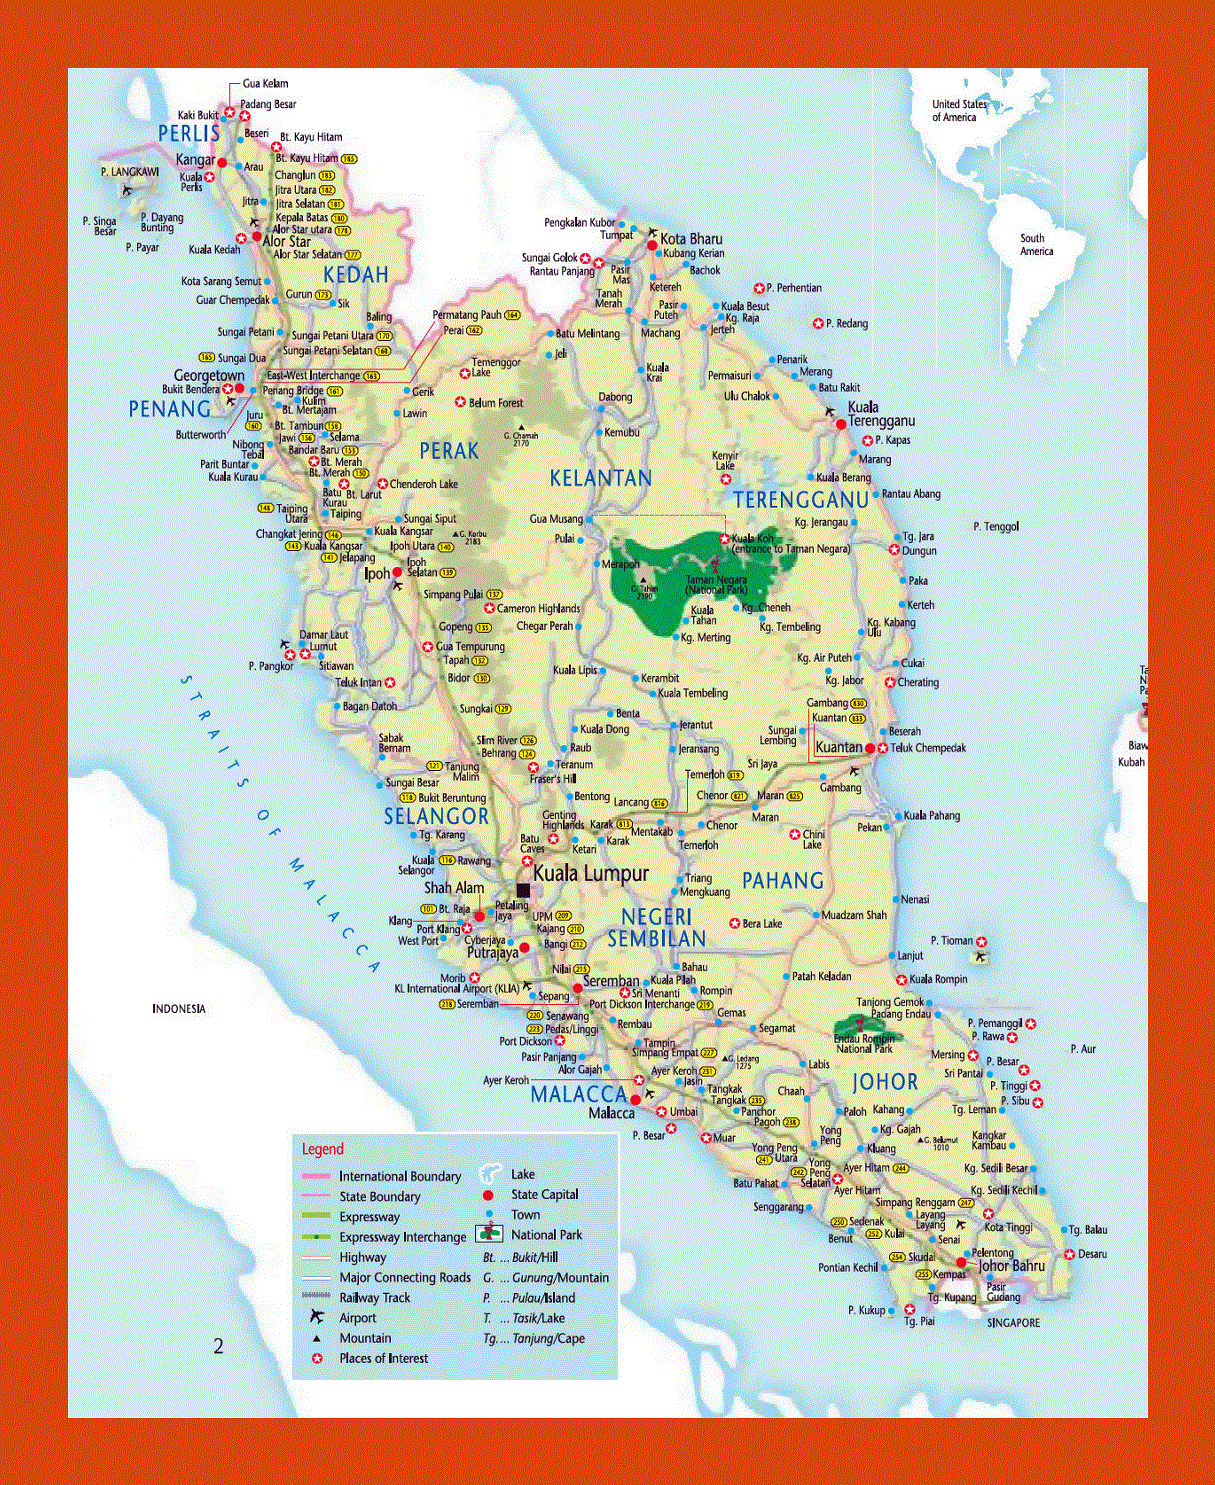 Tourist map of West Malaysia